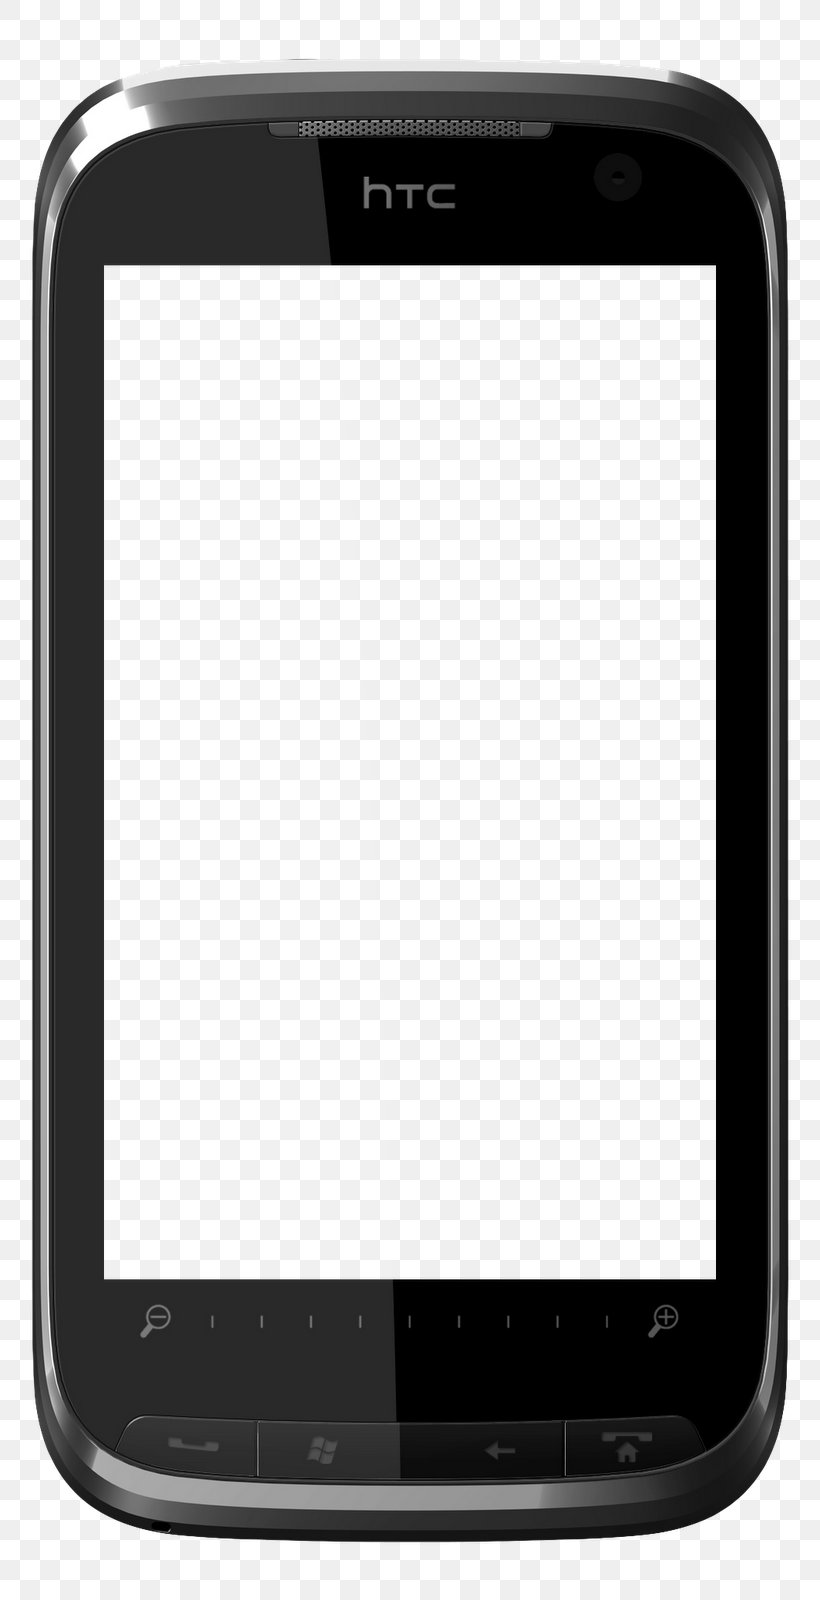 IPhone 4 Telephone Smartphone Clip Art, PNG, 816x1600px, Iphone 4, Cell Site, Cellular Network, Communication Device, Electronic Device Download Free